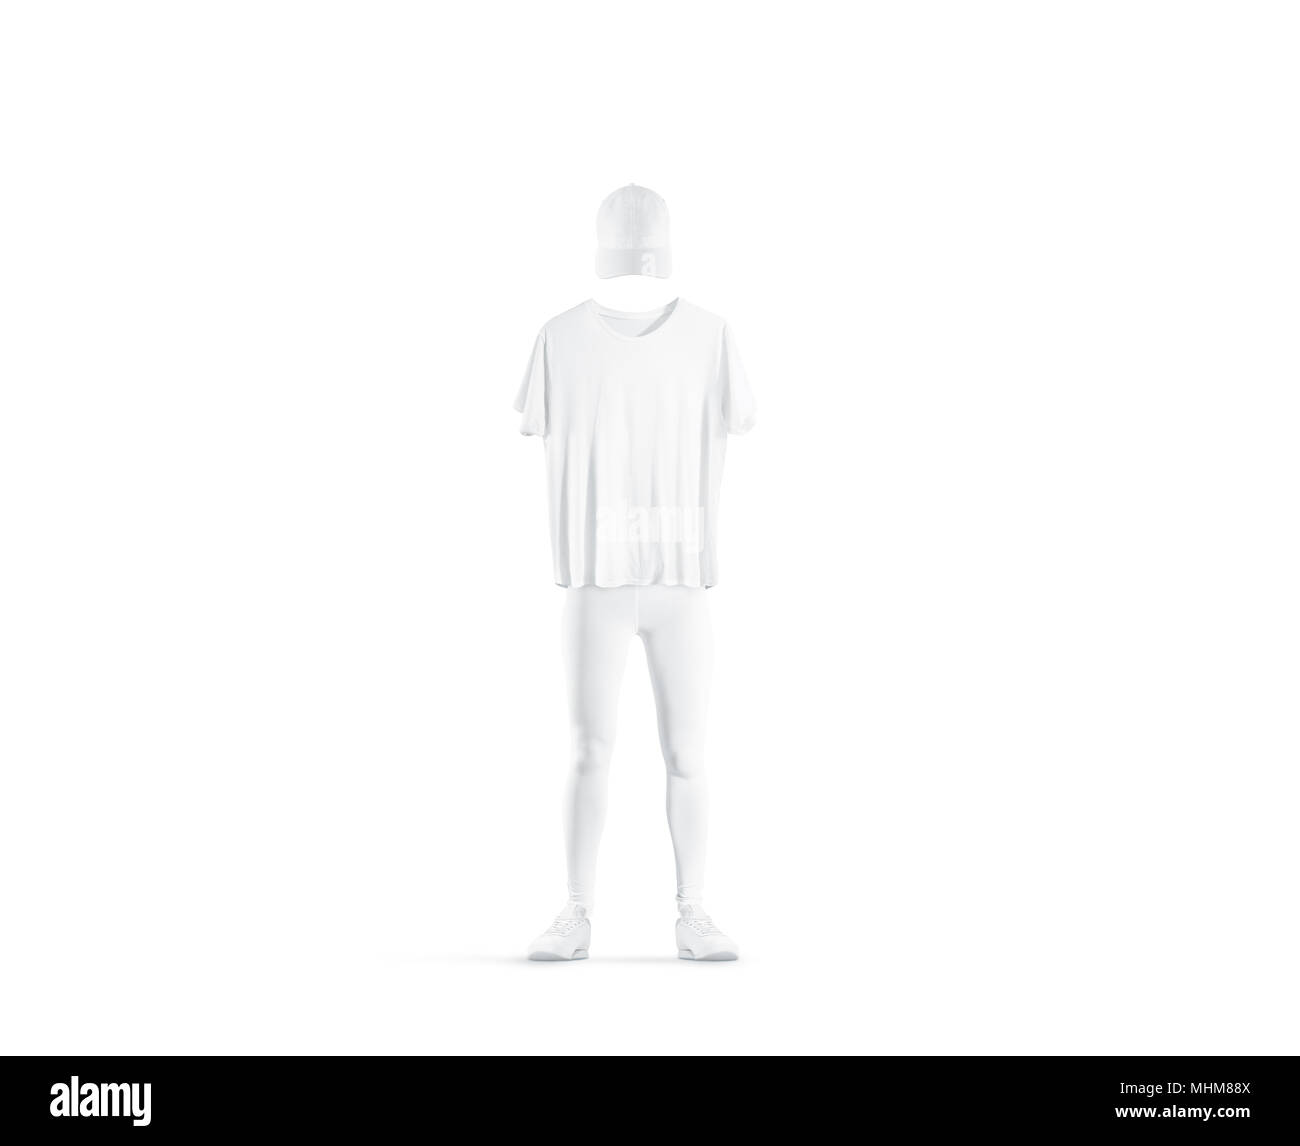 Blank white uniform design mockup isolated. Empty cap, t shirt, pants and shoes mock up. Clear delivery boy or baseball player outfit dress template. Stock Photo